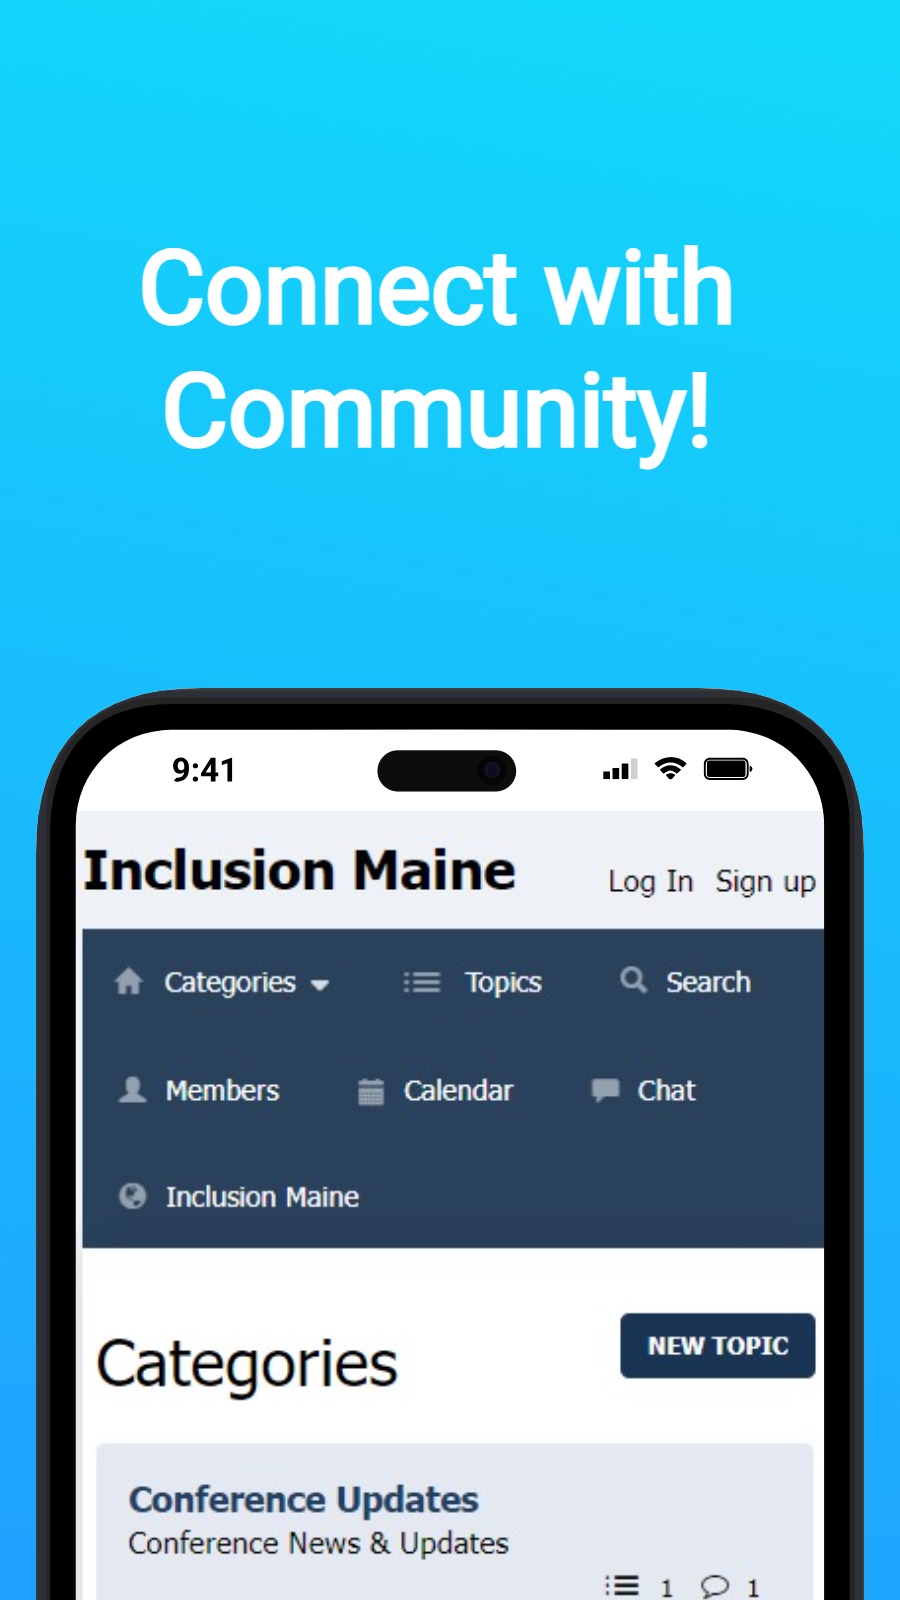 Connect with Community!